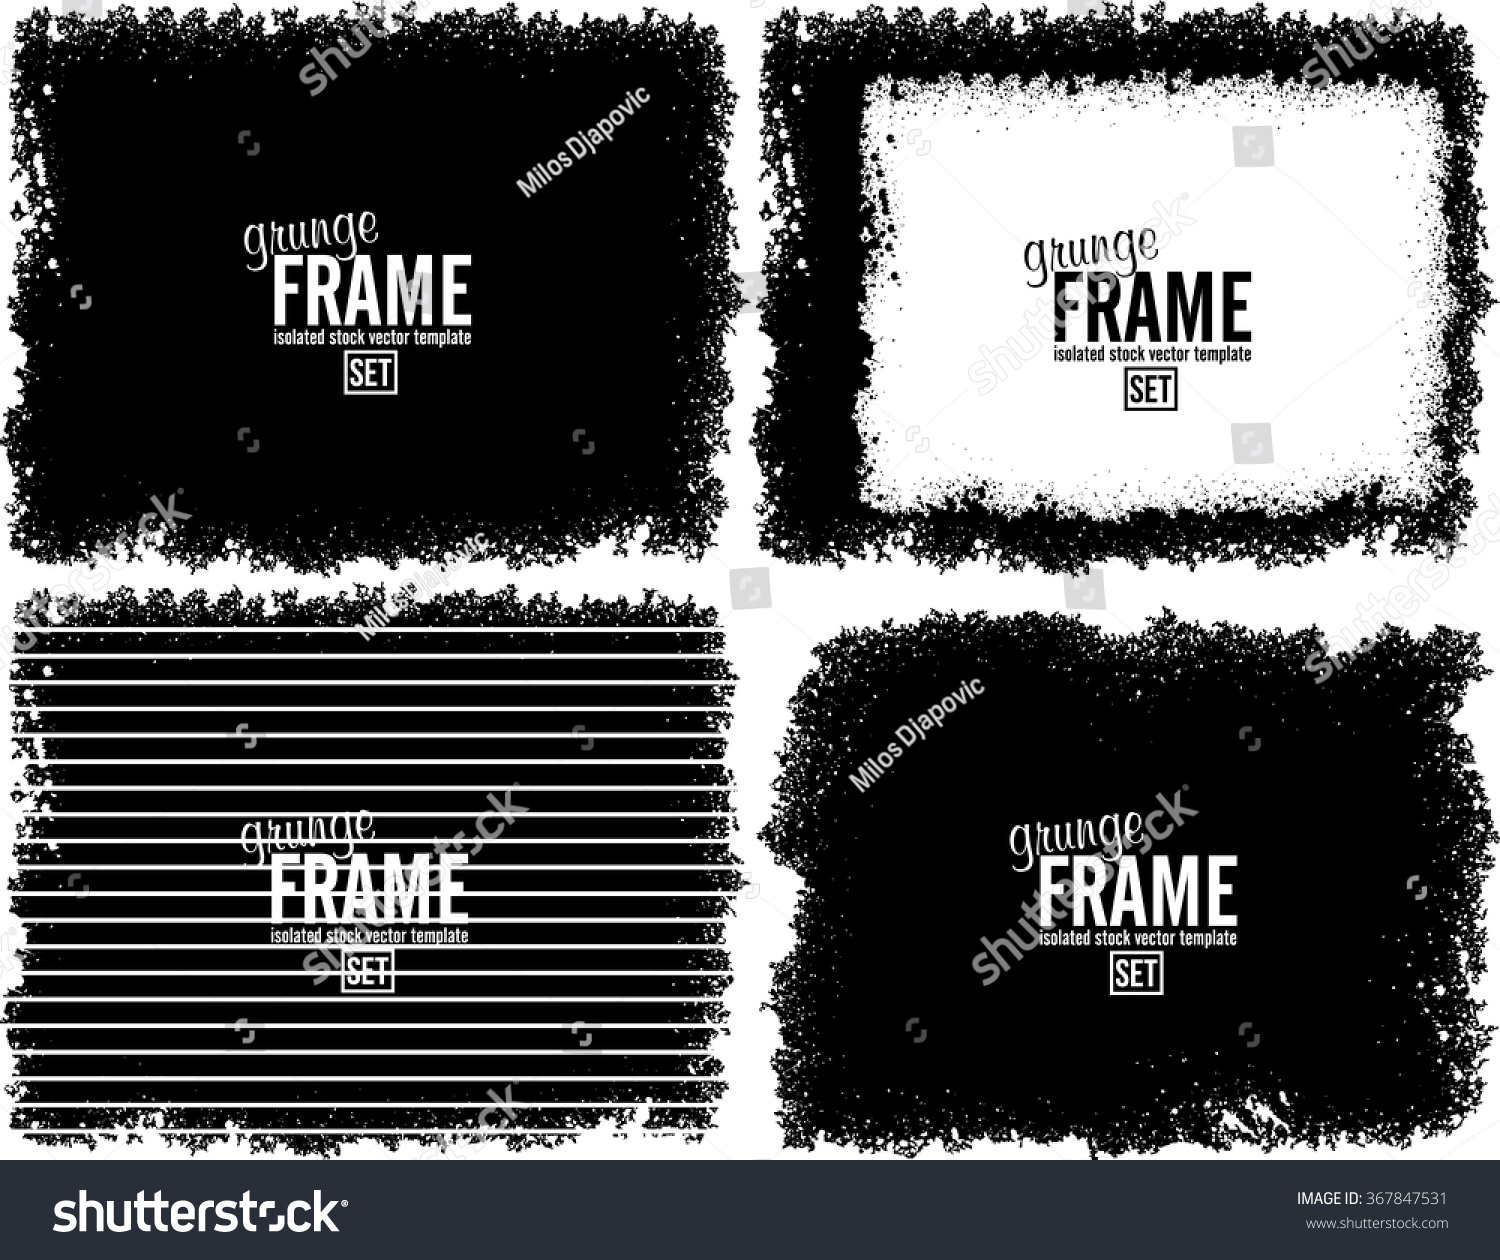 Grunge frame texture set - Abstract design template. Isolated stock vector set - easy to use #367847531